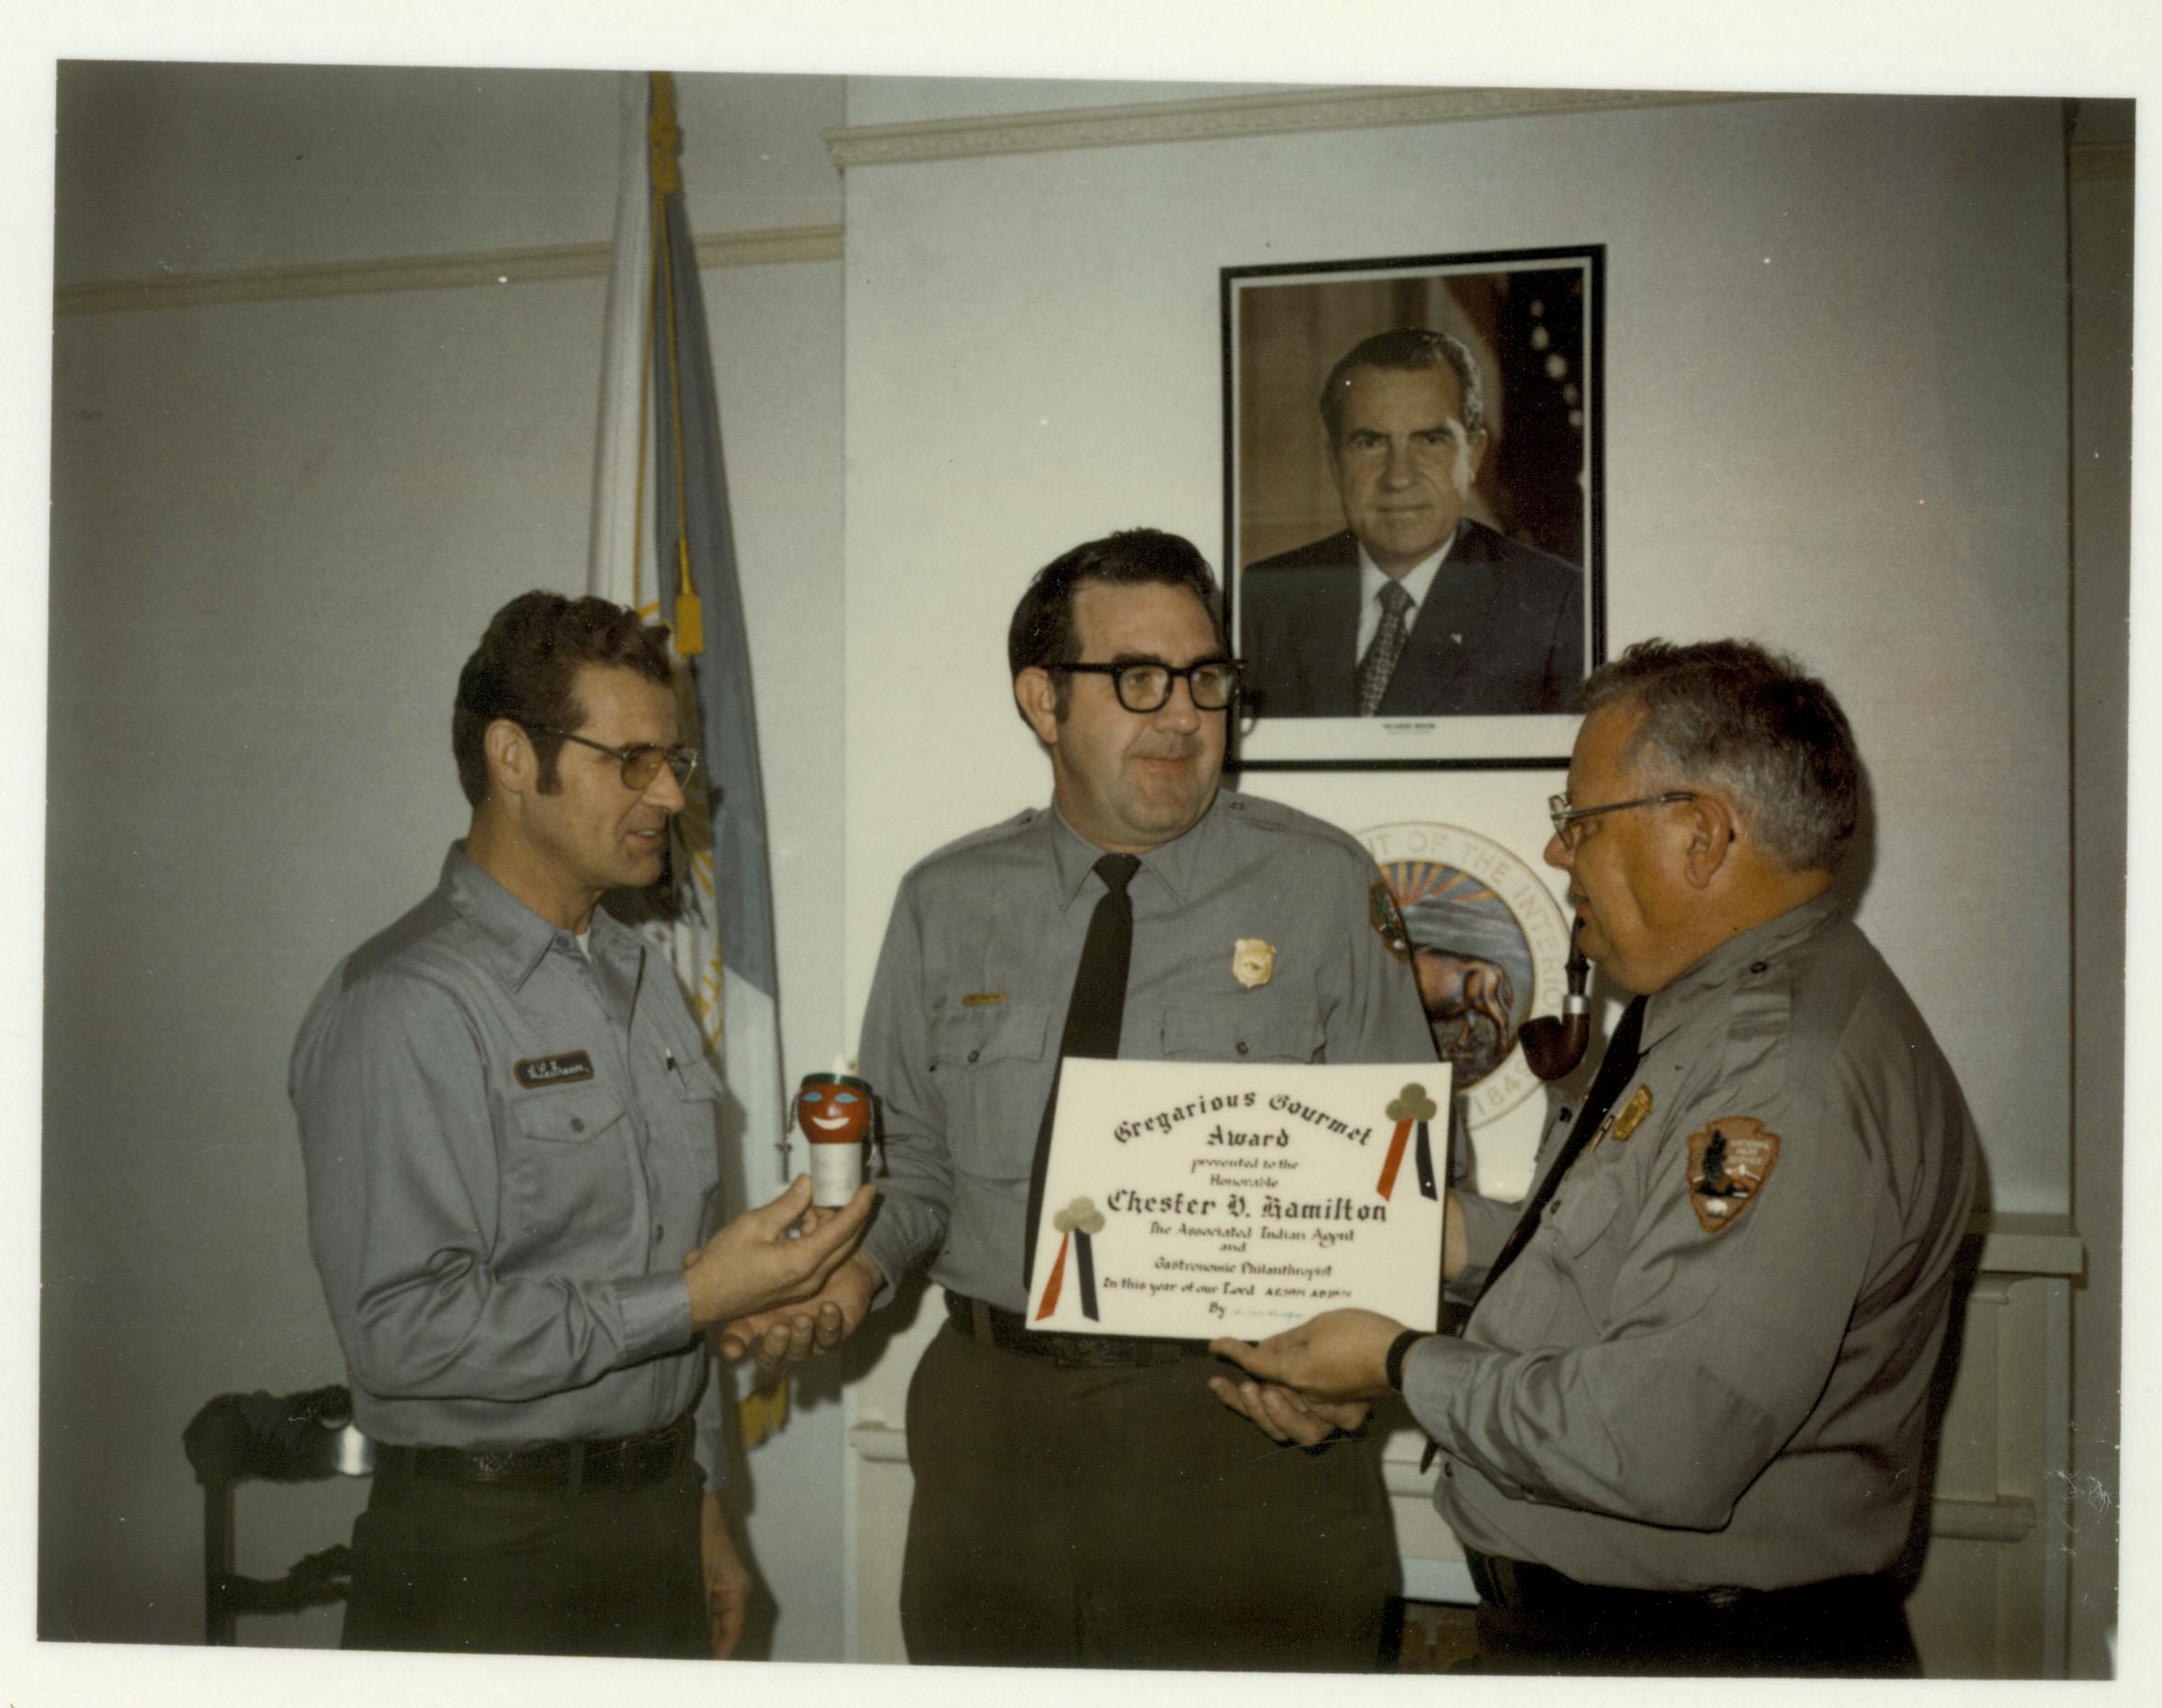 Special award to Ranger Chet Hamilton given by Maint. staff Bob LaFrance and Supt. Al Banton for trip to and from Mid-West Regional office.  Given in Supt. office in Lyon House looking West awards, staff, Lyon, humor